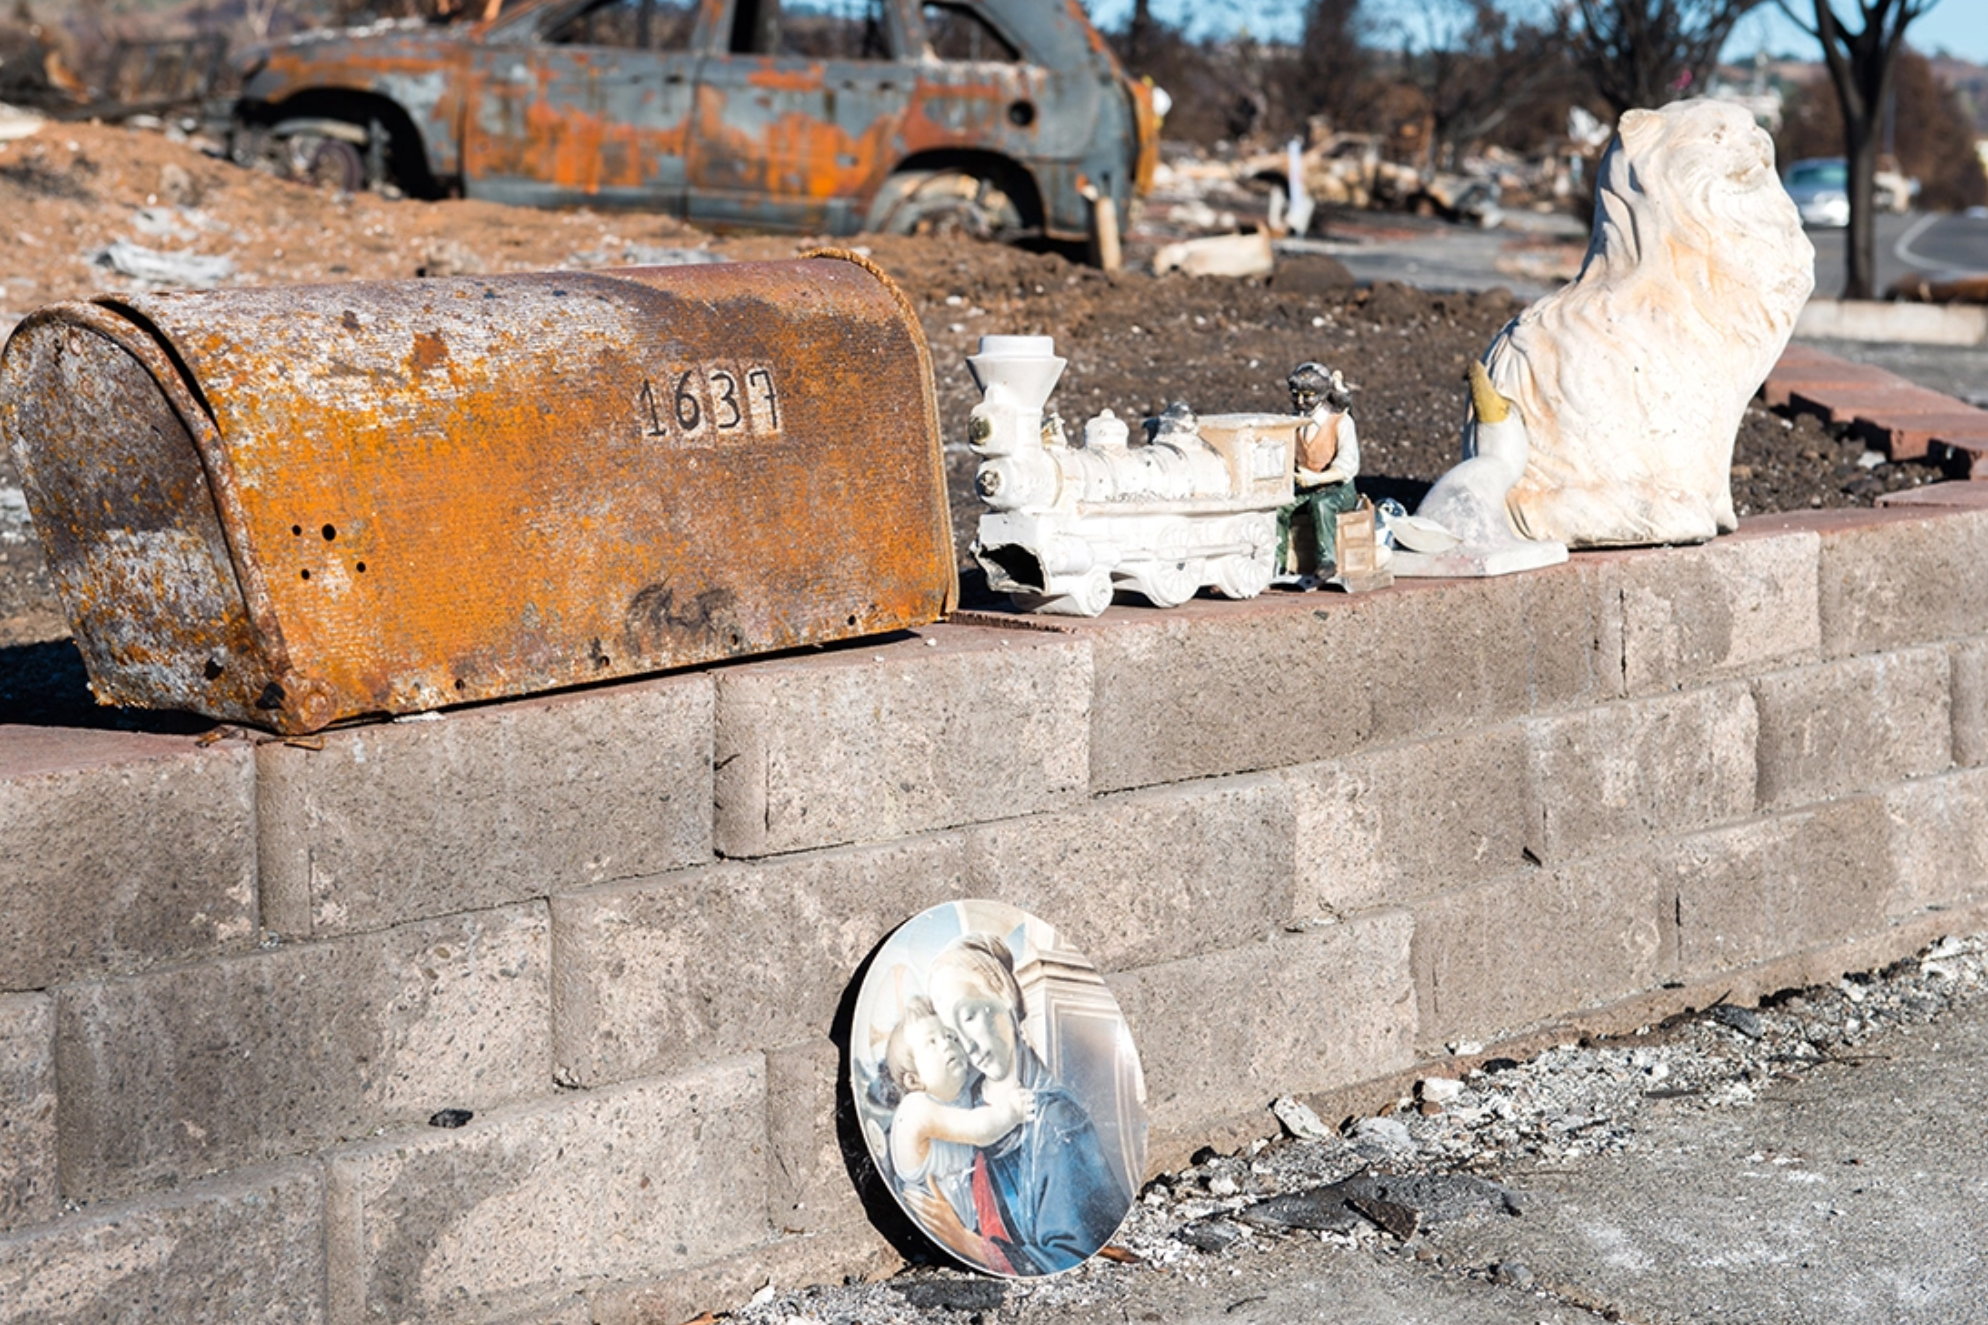 A photo shows a rusted mailbox, a rusted car and decorative sculptures as remnants of a wildfire.